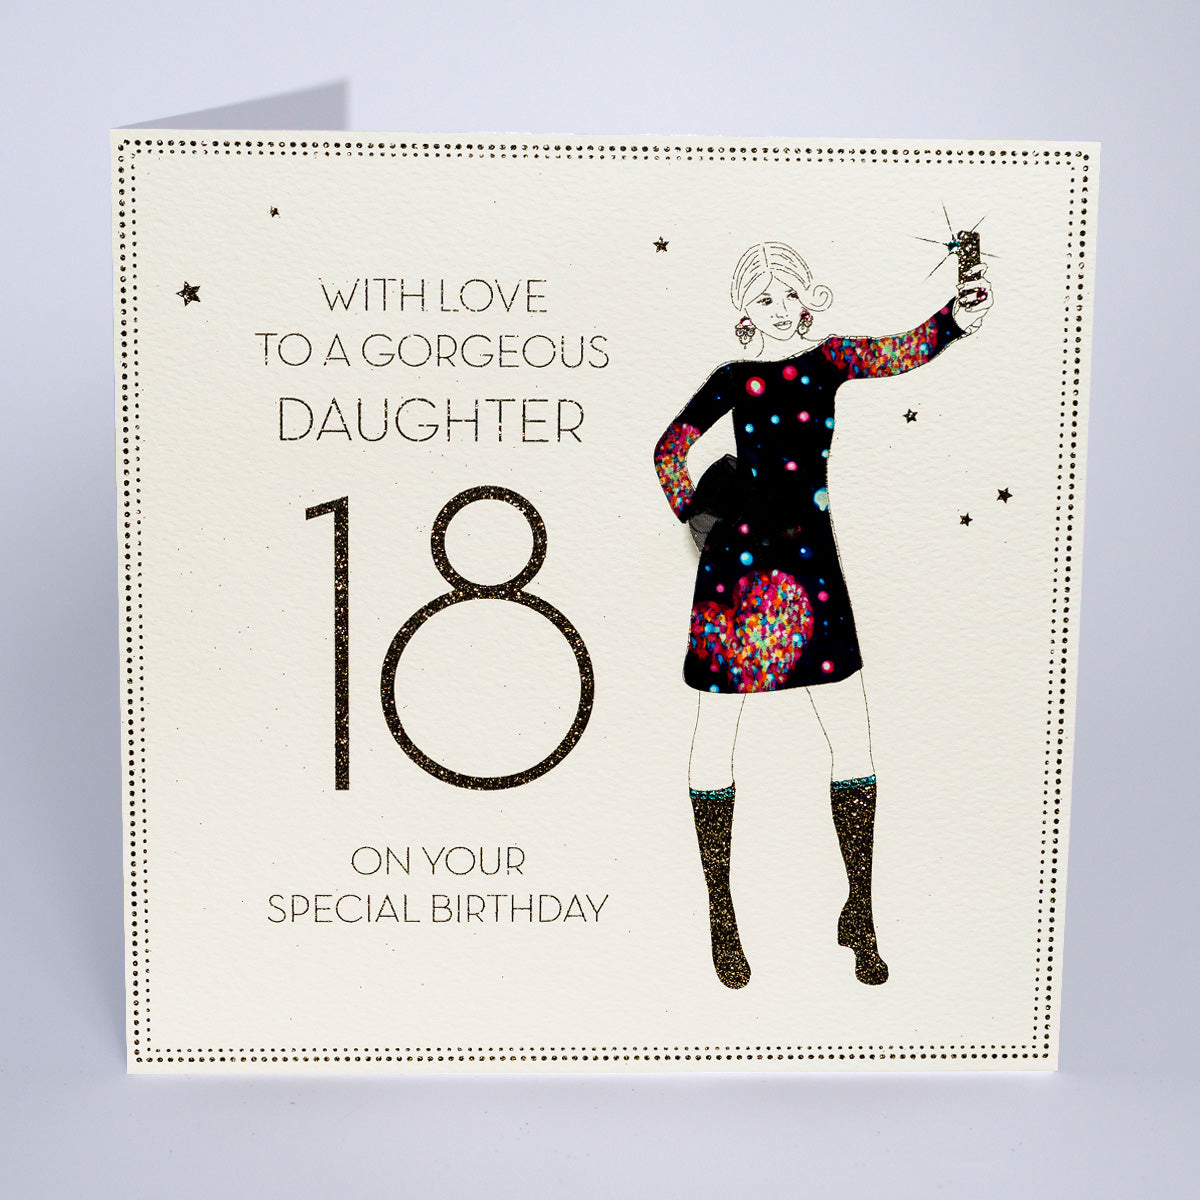 18 - With Love To a Gorgeous Daughter